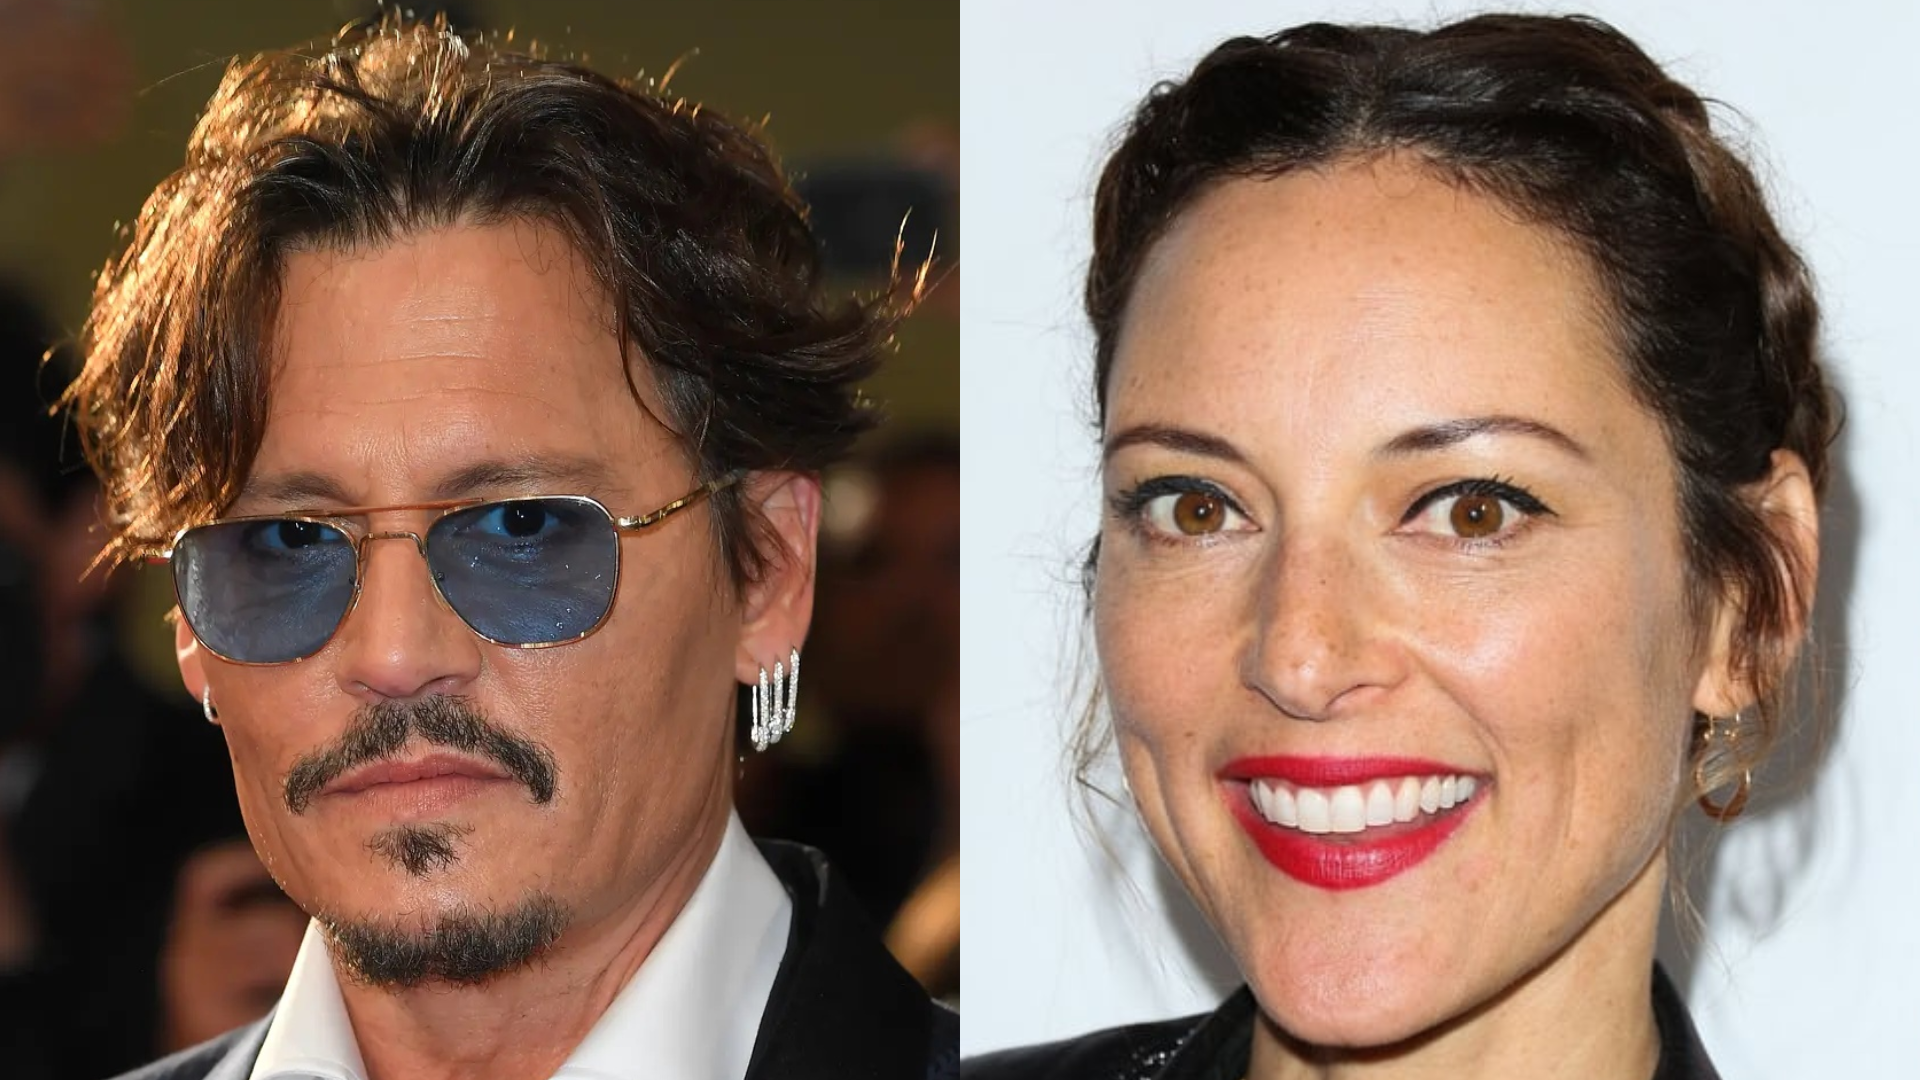 Johnny Depp Responds To ‘Blow’ Co-Star Lola Glaudini’s Accusations Of Verbal Assault